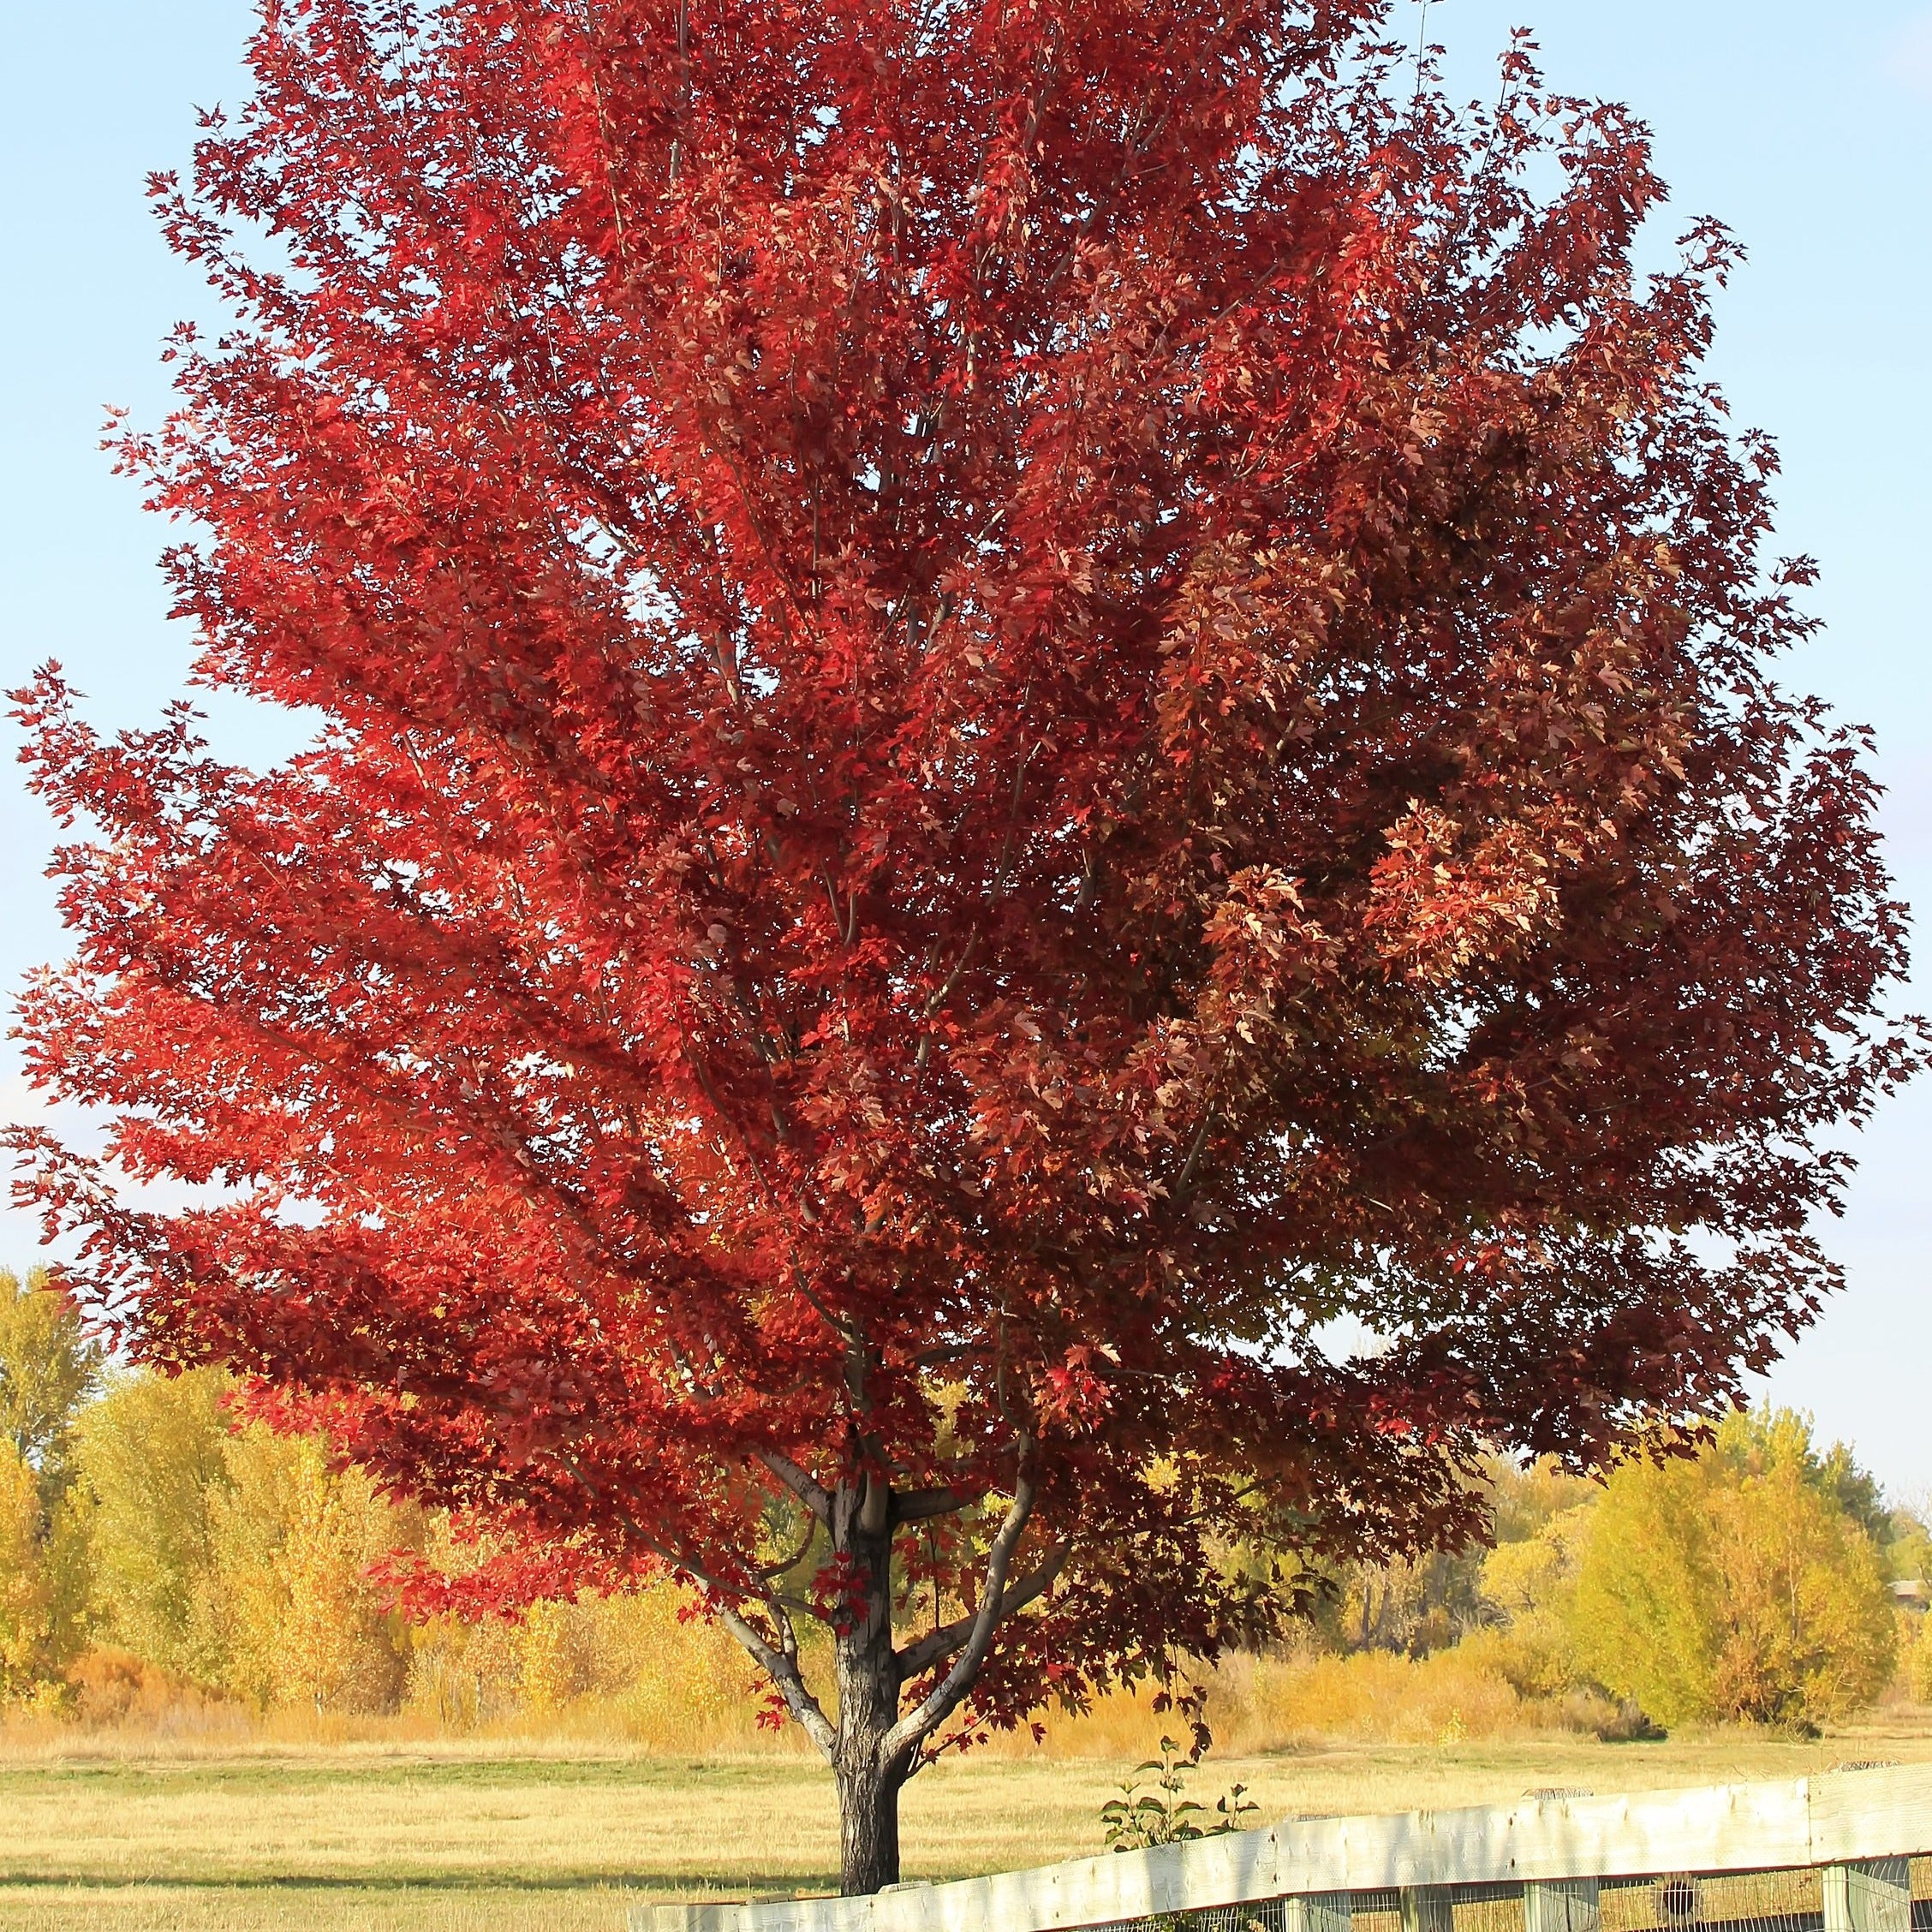 The Sun Valley Red Maple Tree (Acer rubrum 'Sun Valley') is a U.S